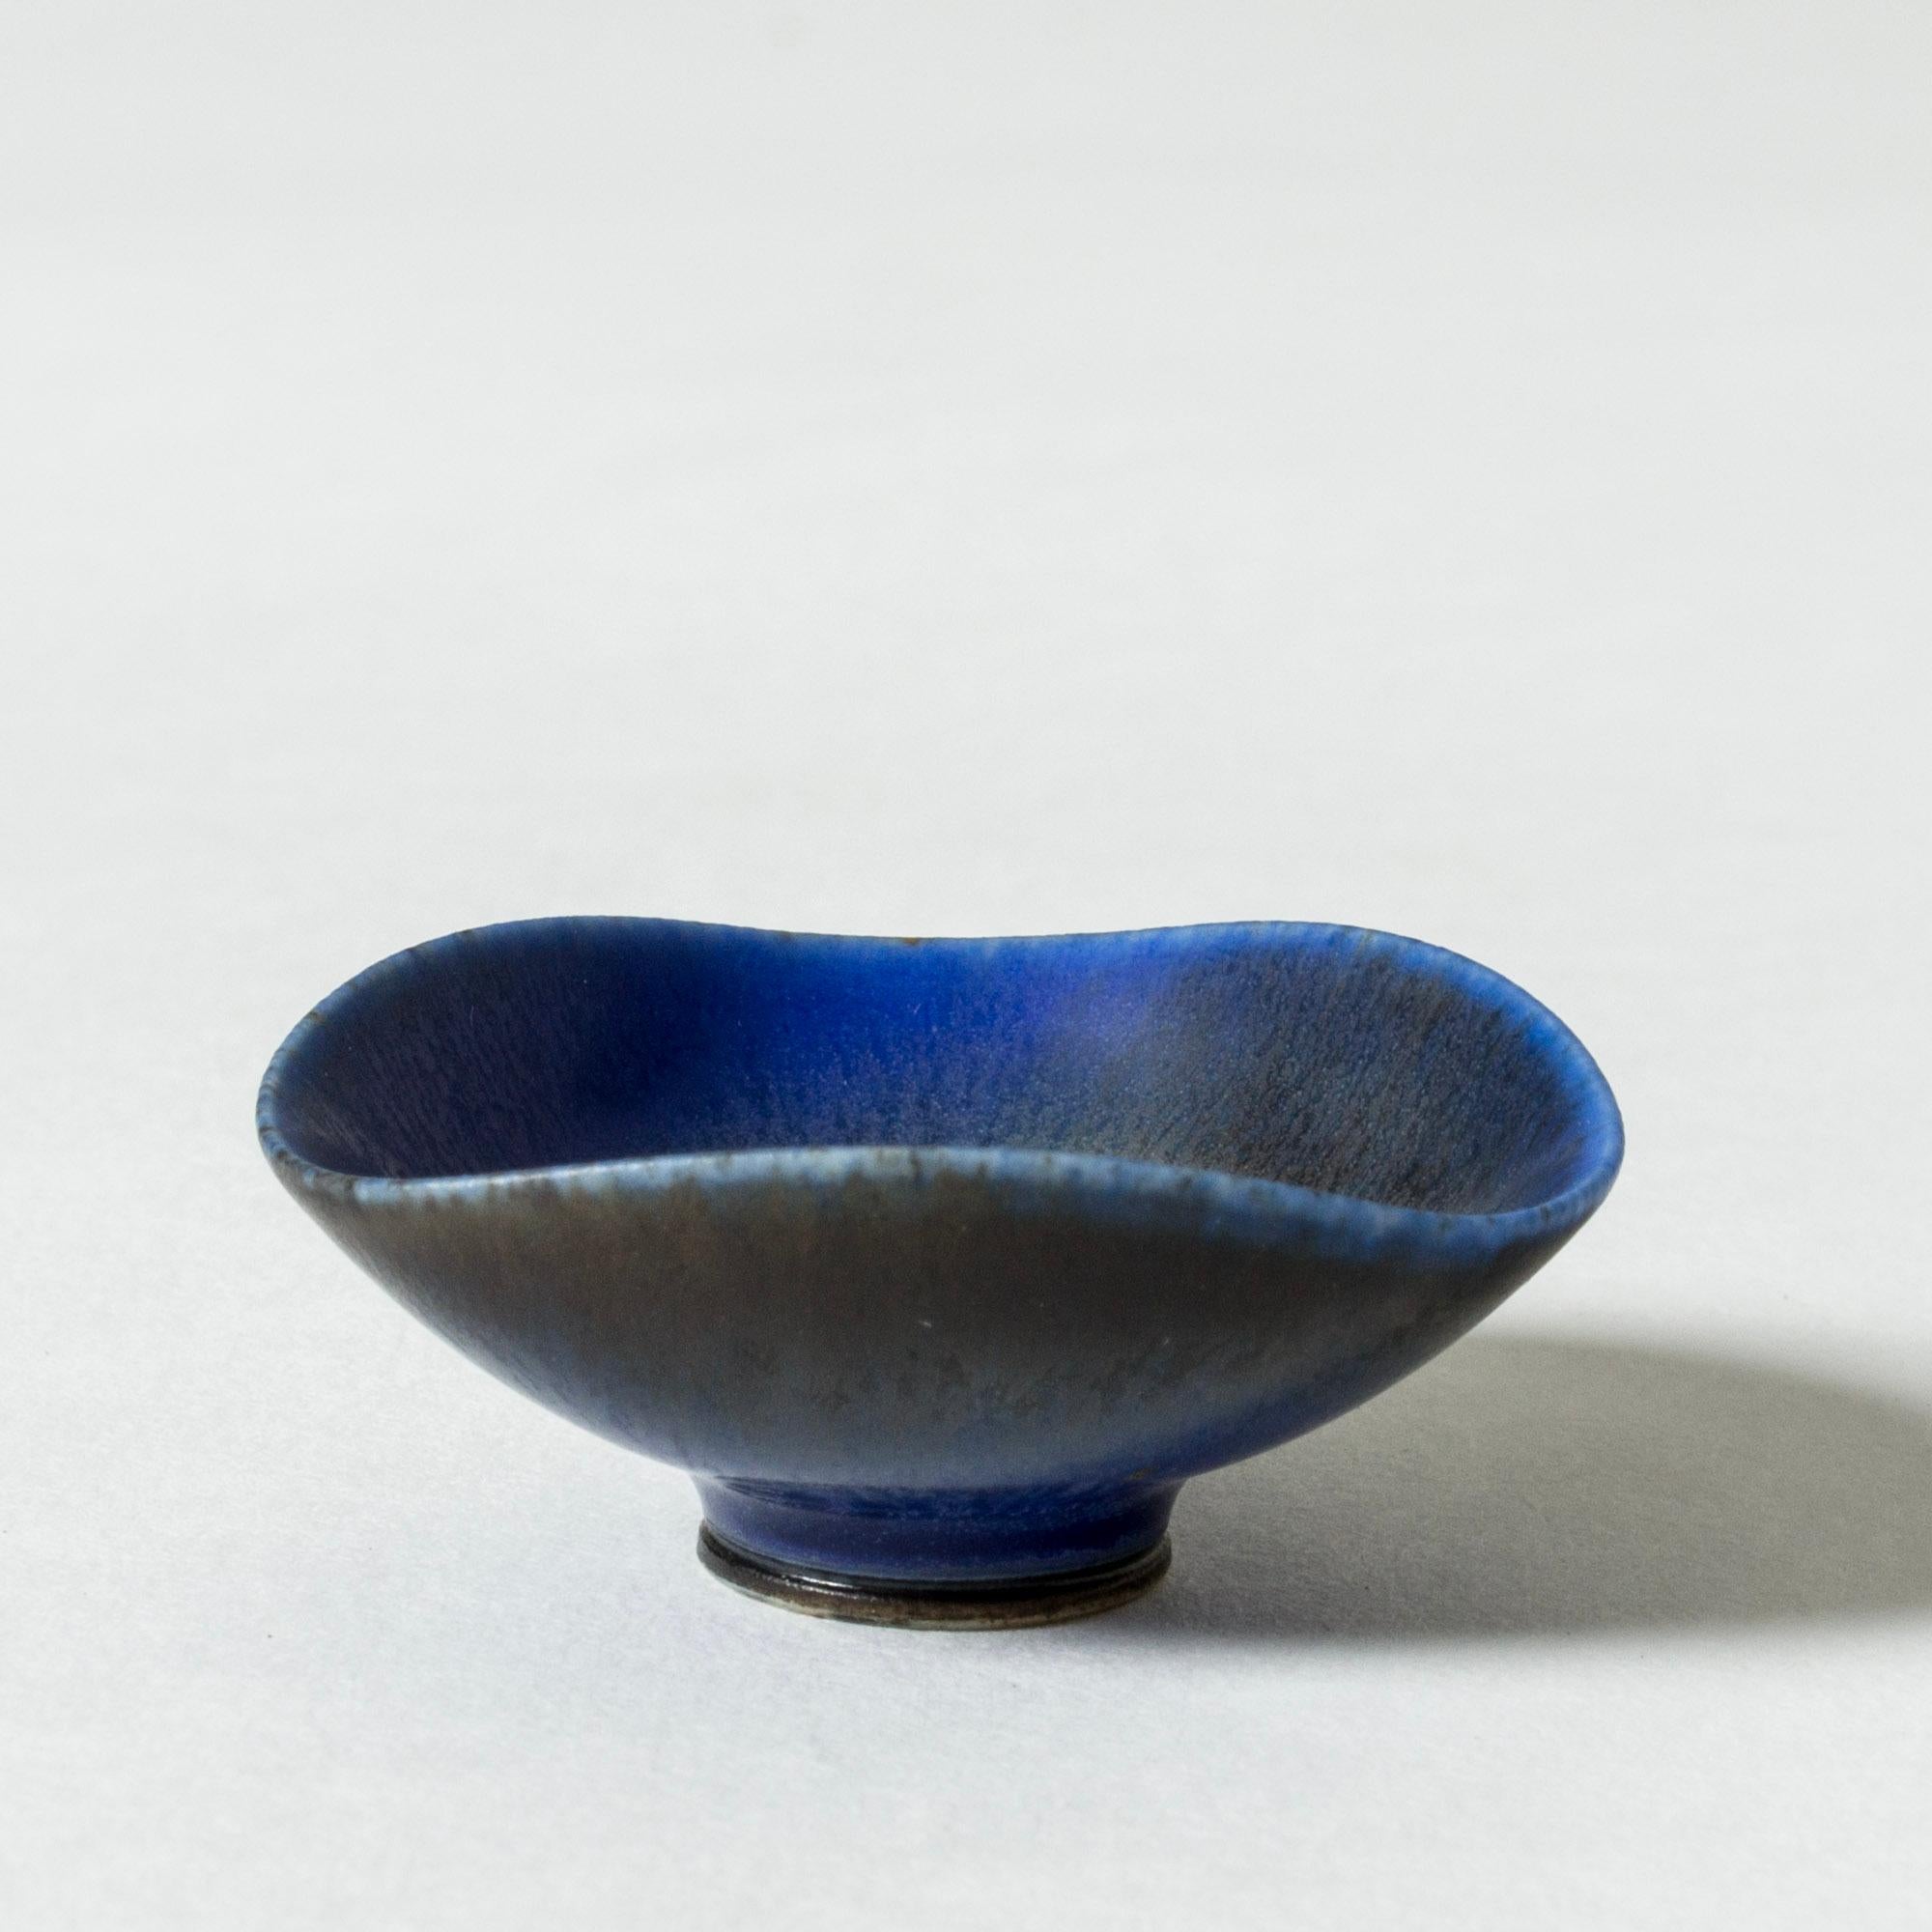 Lovely miniature stoneware bowl by Berndt Friberg. Triangular form with rounded corners, undulating edge. Elegant blue hare’s fur glaze.

Berndt Friberg was a Swedish ceramicist, renowned for his stoneware vases and vessels for Gustavsberg. His